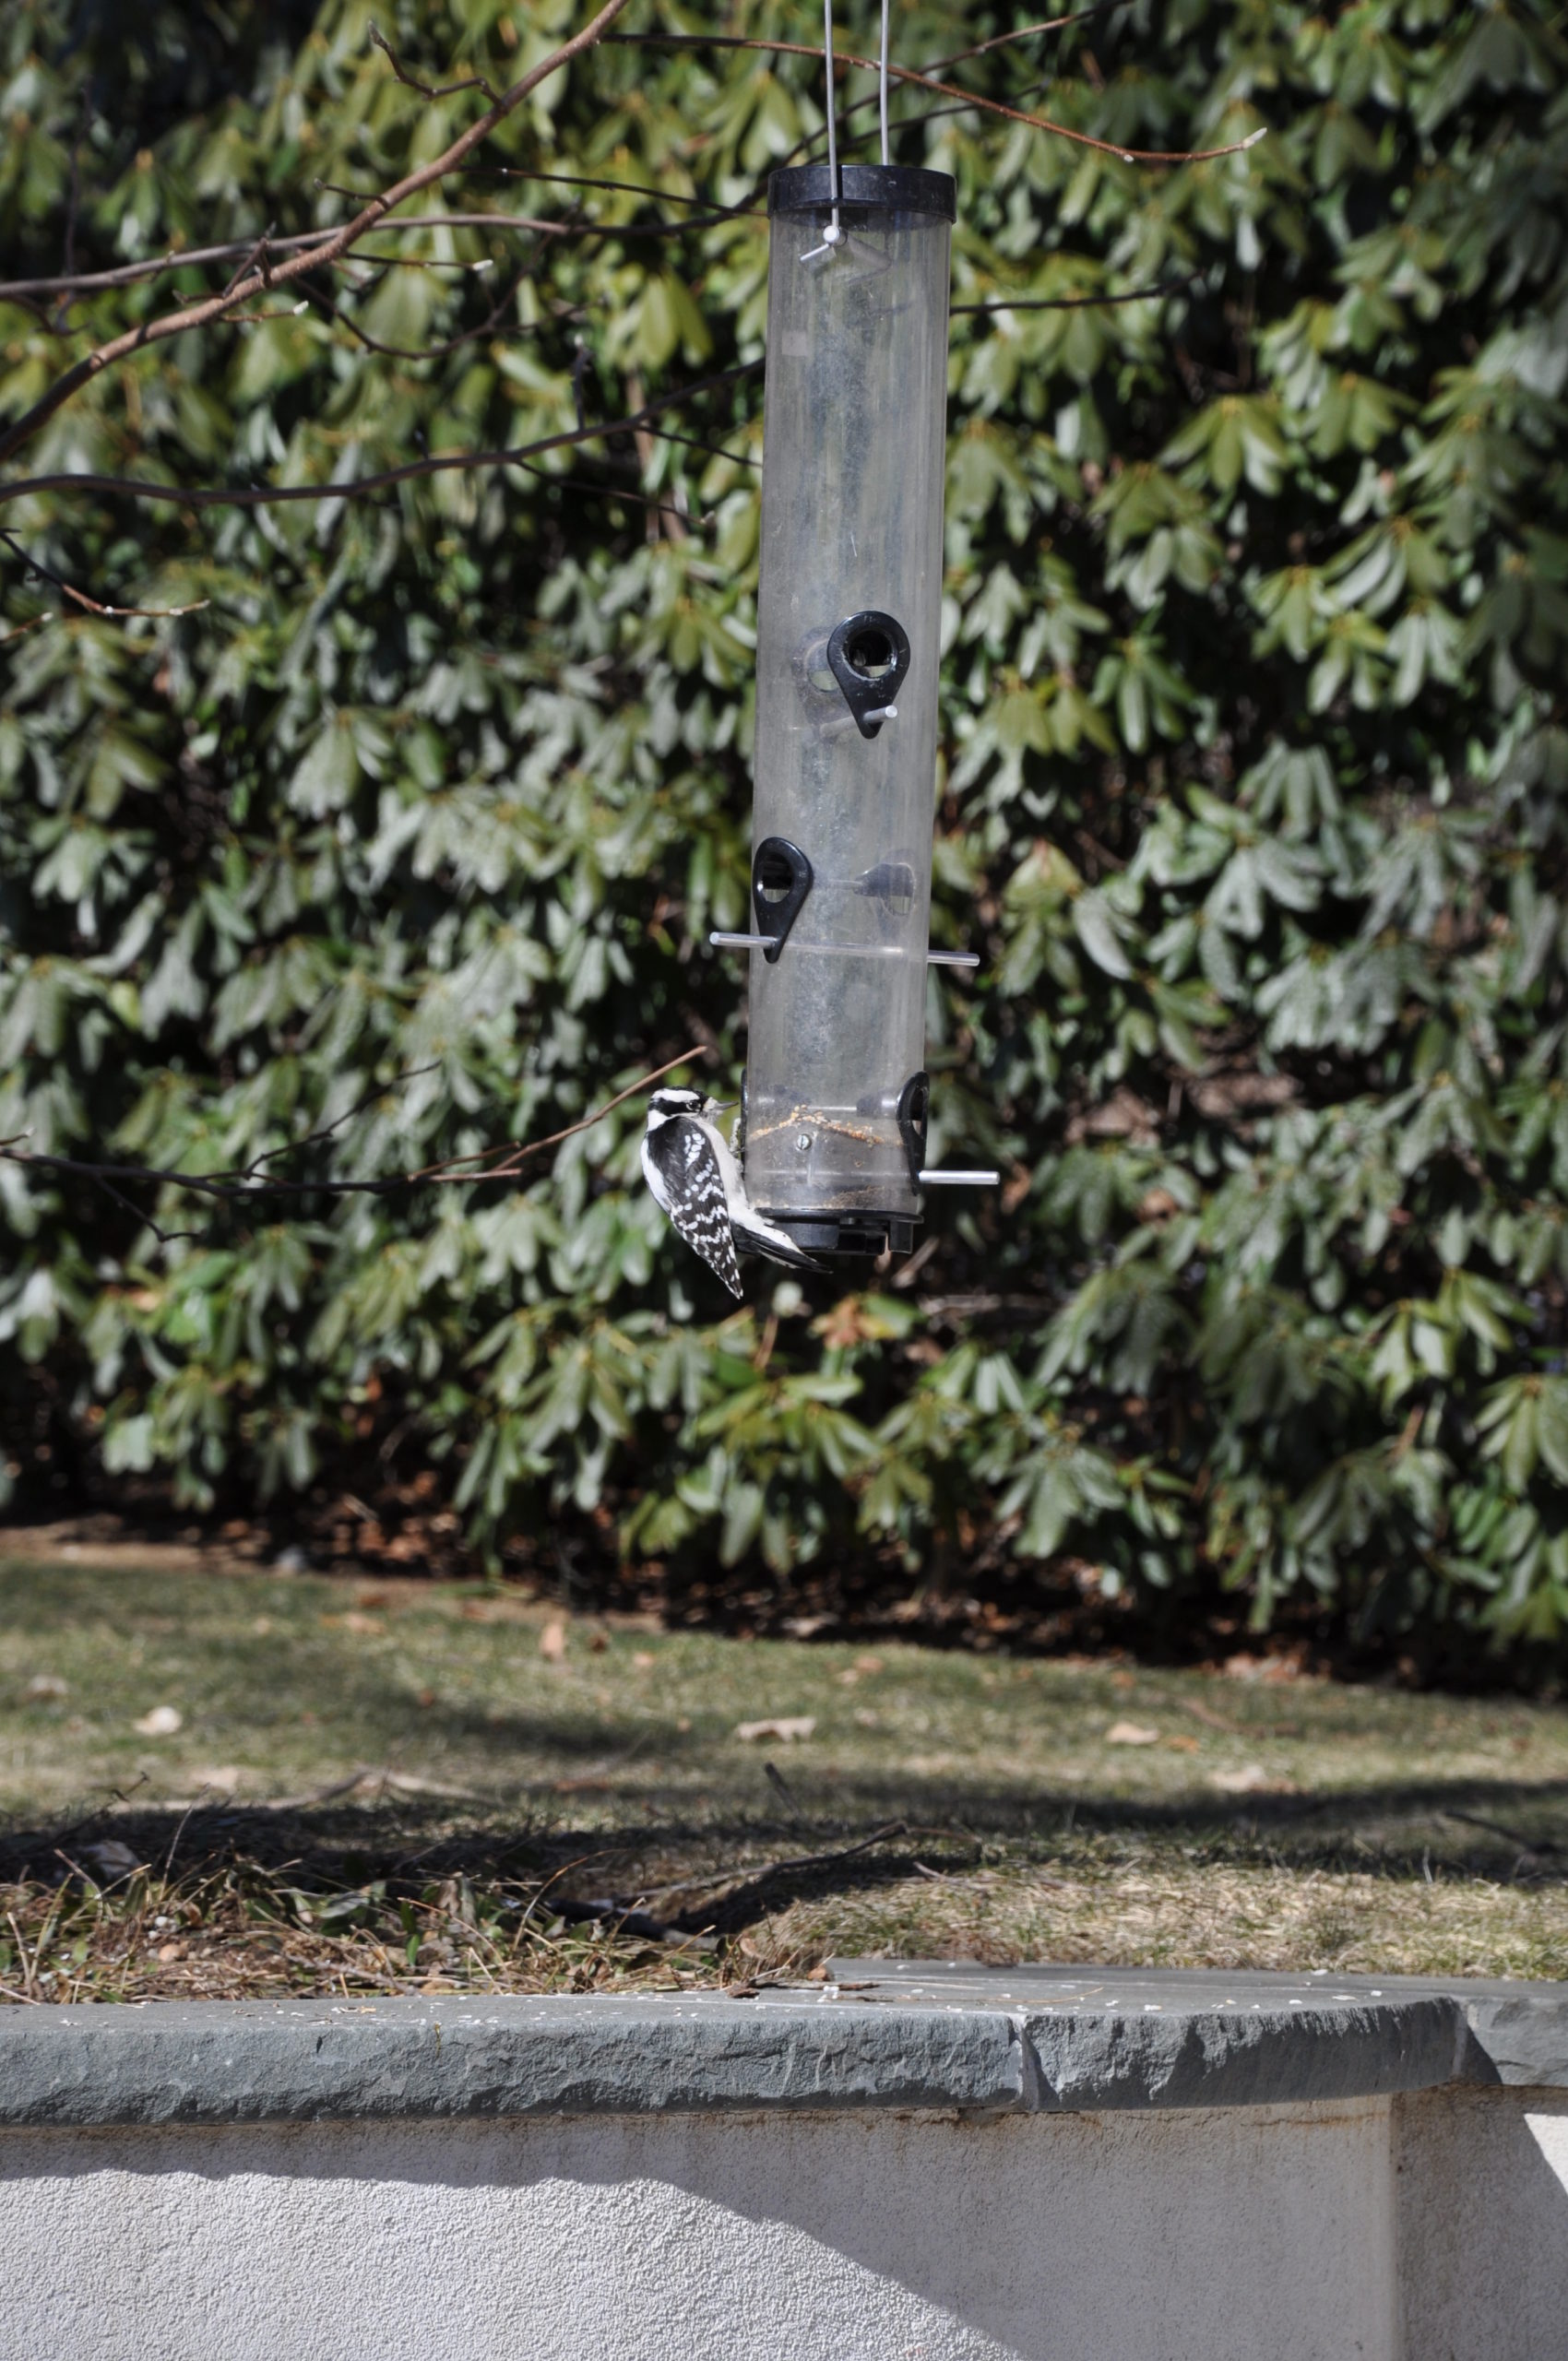 A female downy woodpecker gets the last of the seeds from a cylinder feeder.